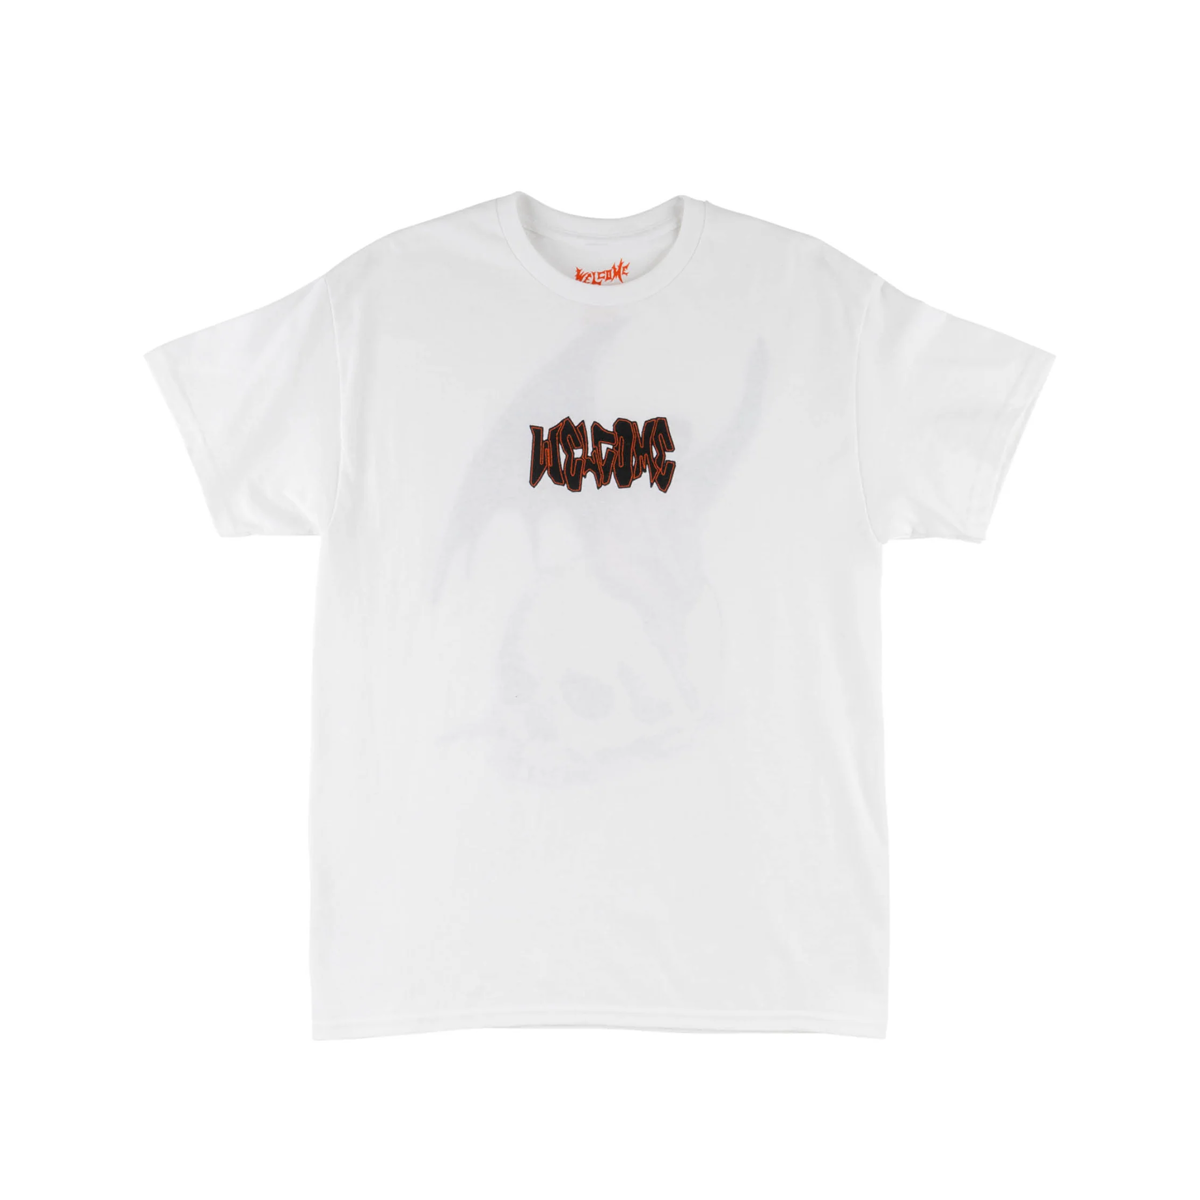 Welcome Nephilim T-Shirt - White